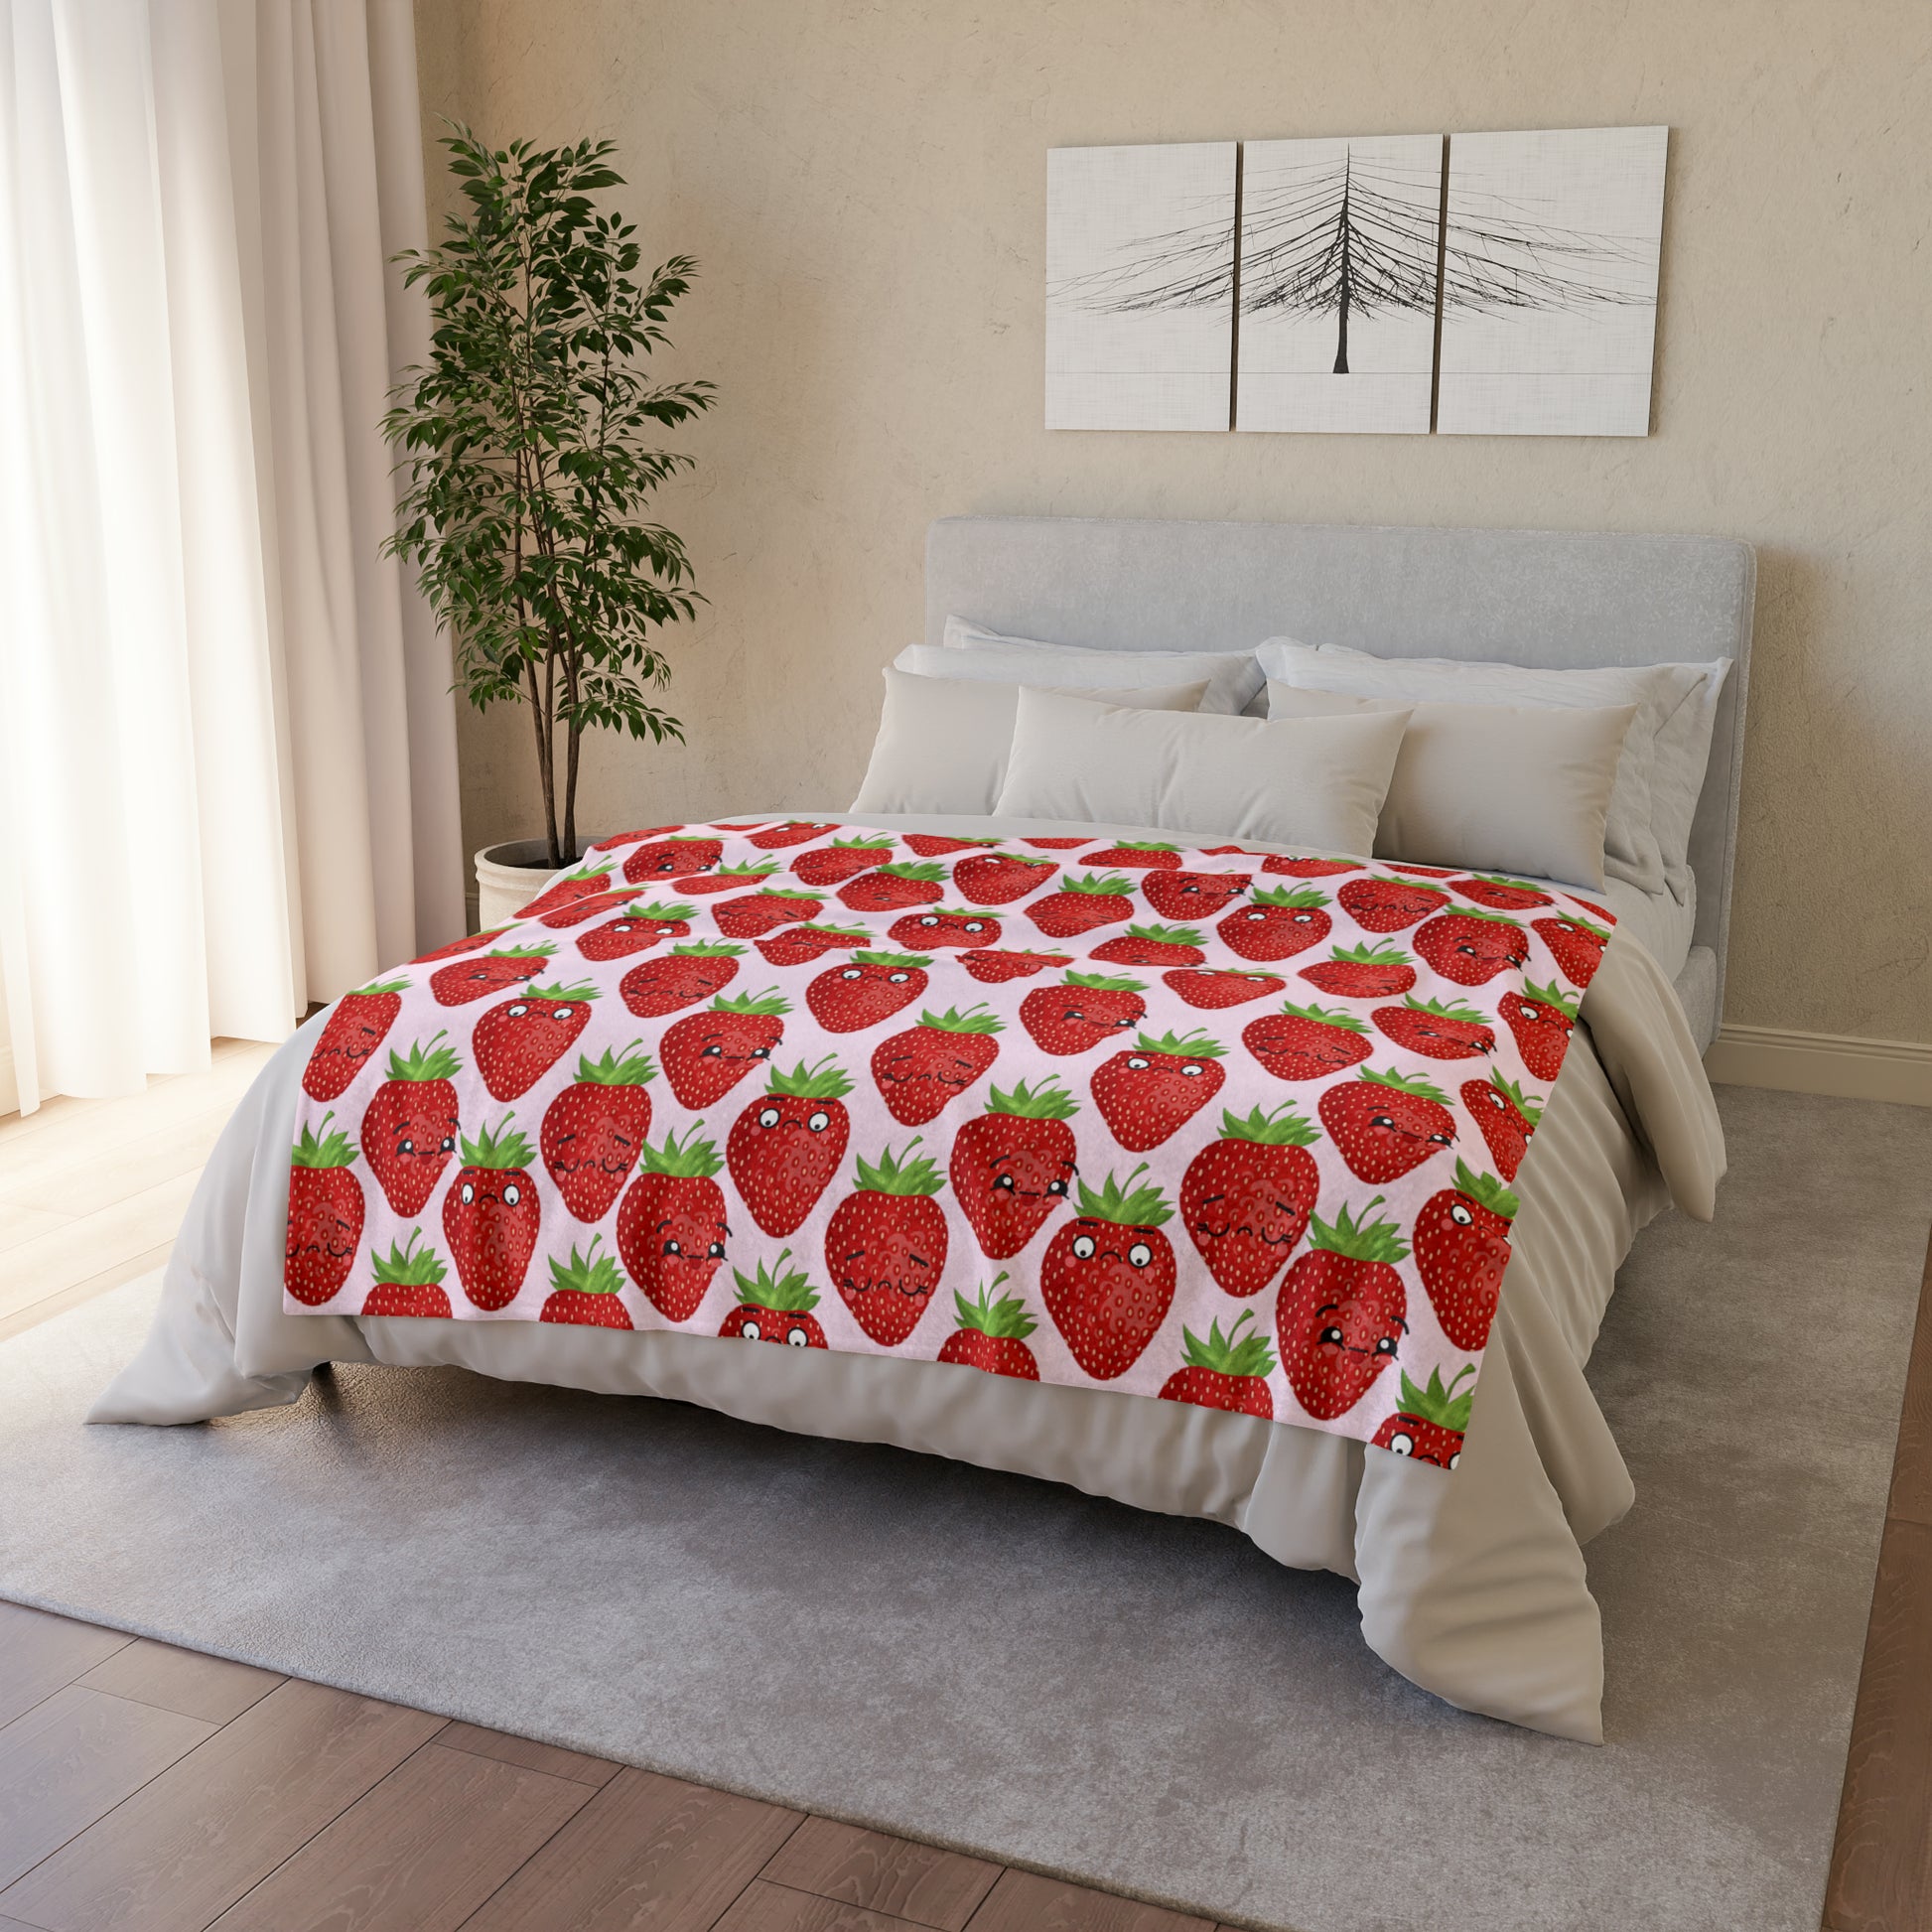 Strawberry Characters - Soft Polyester Blanket 50" × 60" Blanket Food